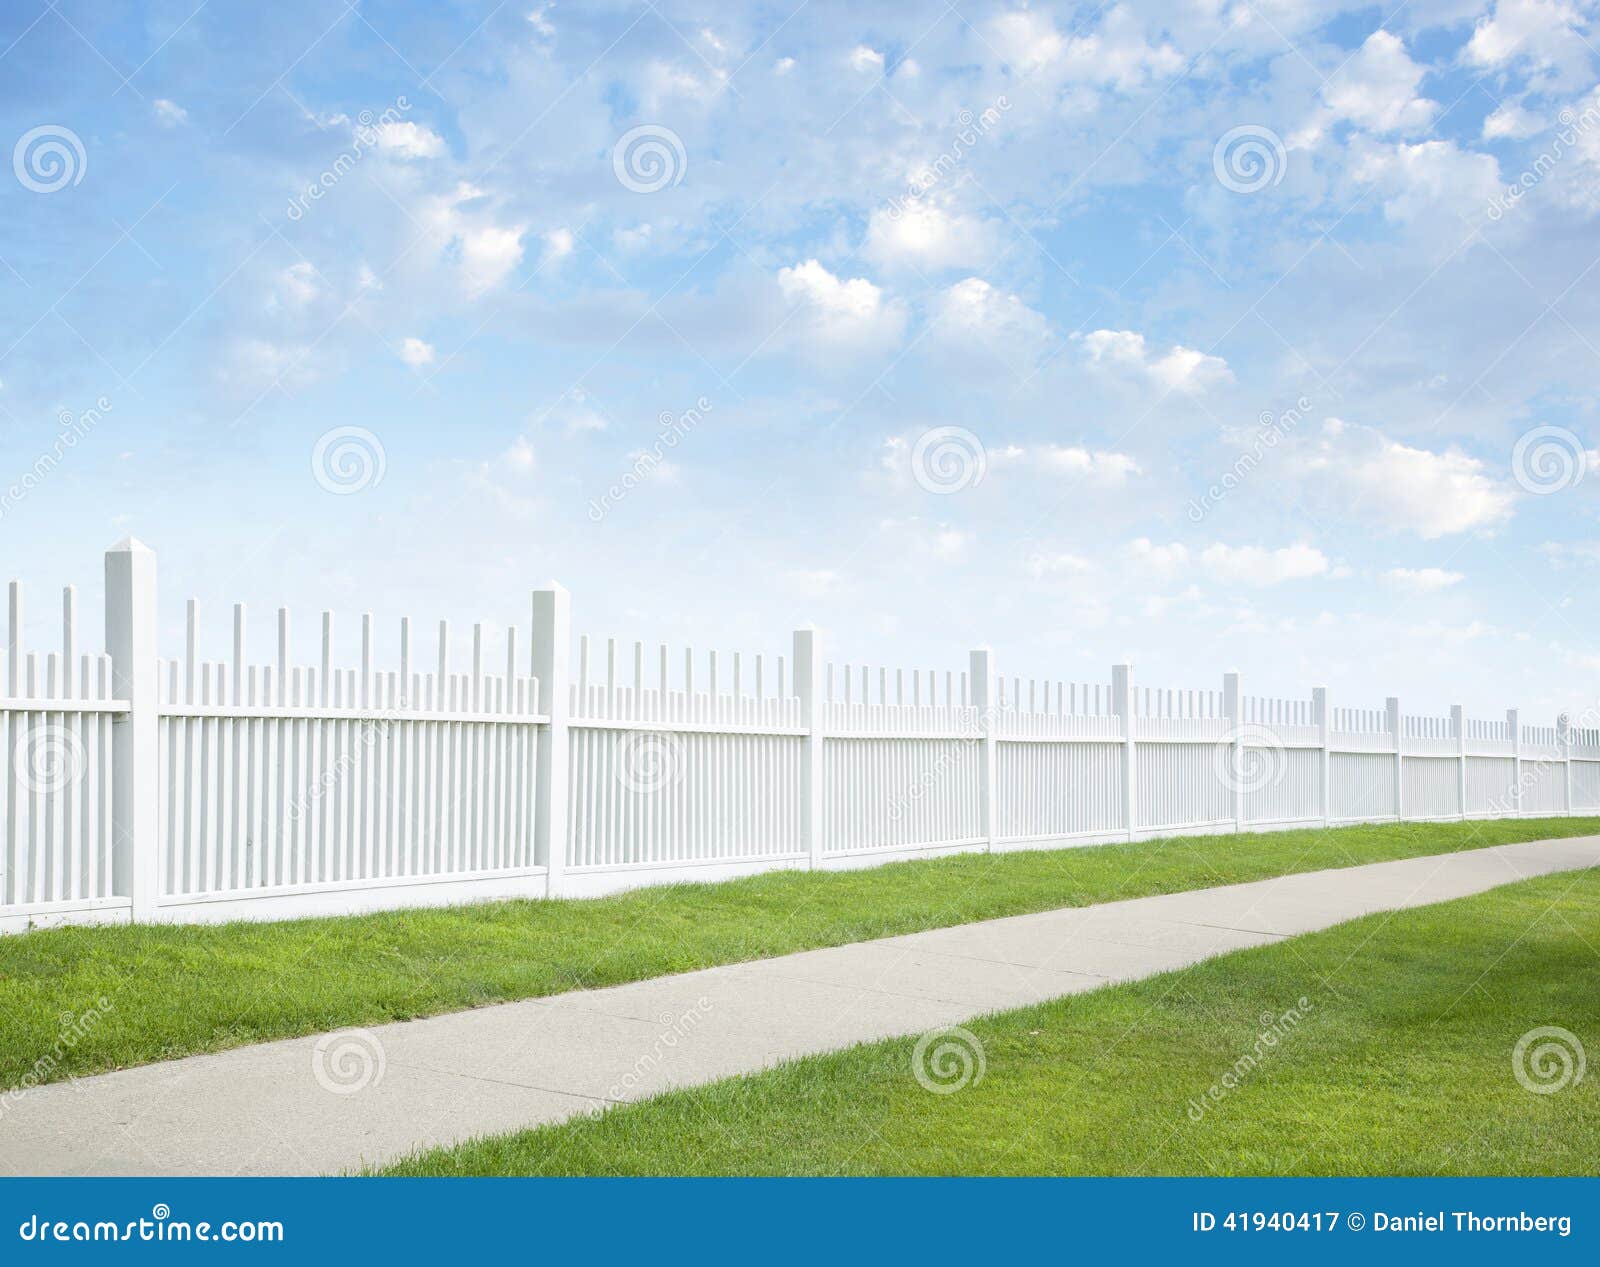 white fence, grass, sidewalk, blue sky and clouds